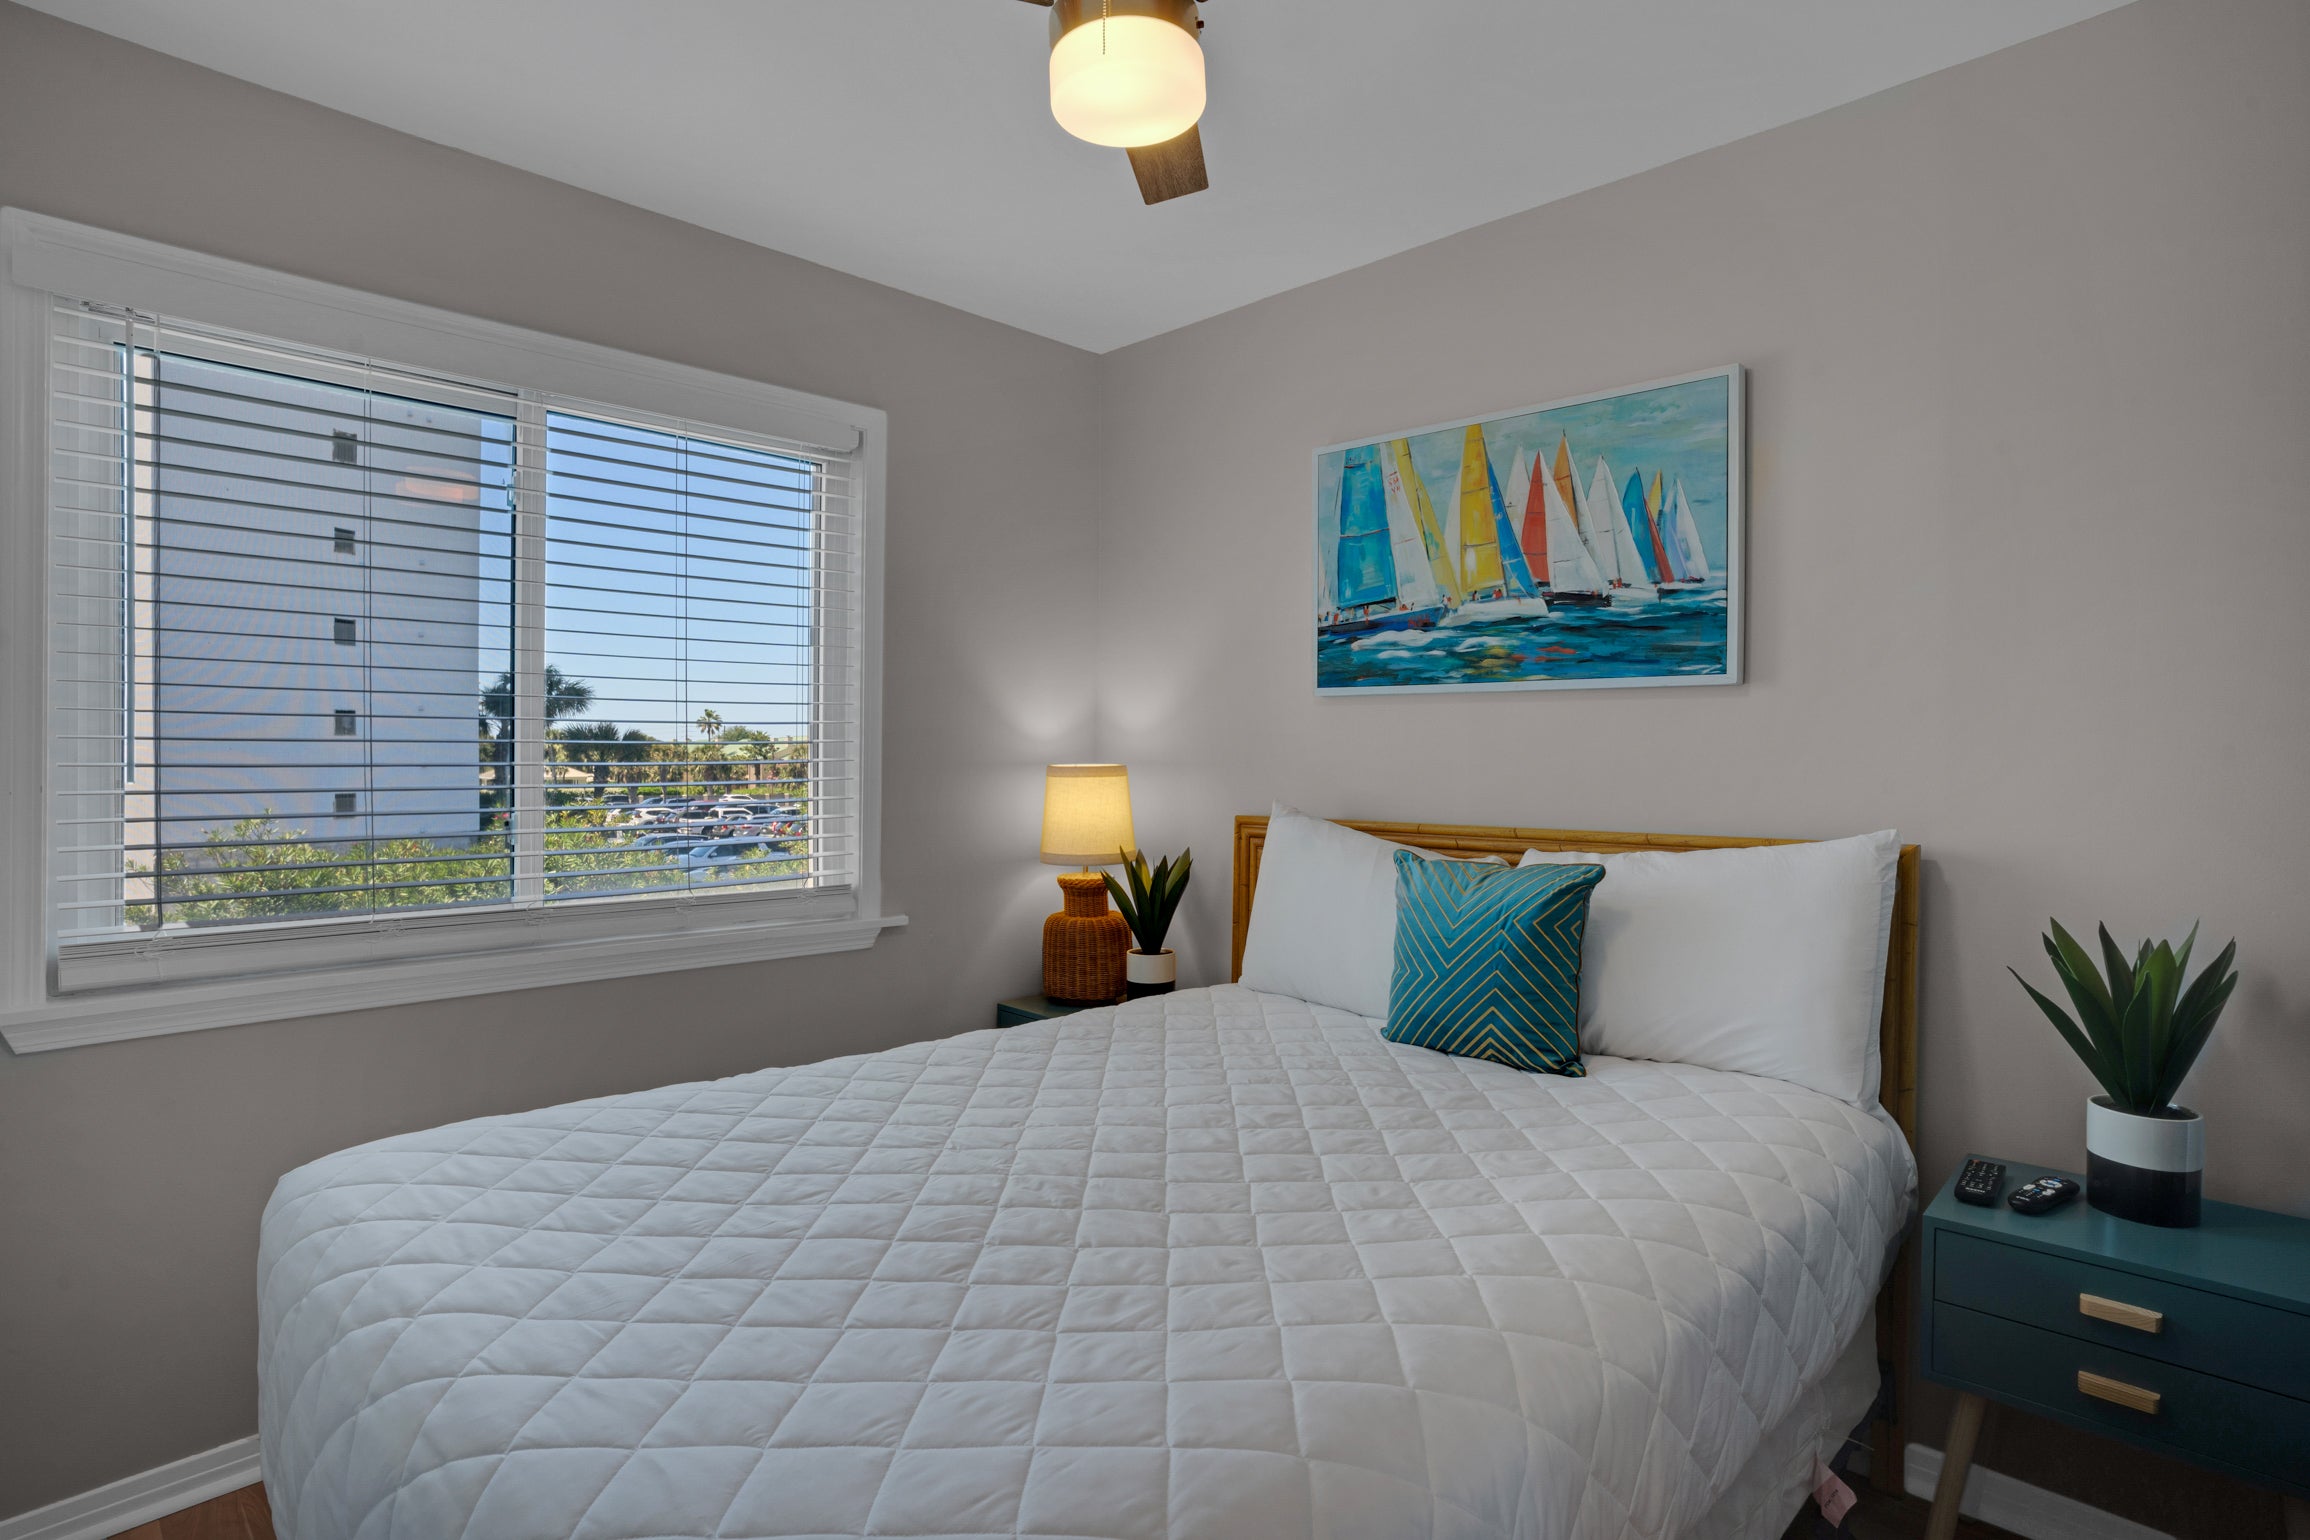 Second bedroom offers a queen bed and a view of the Gulf